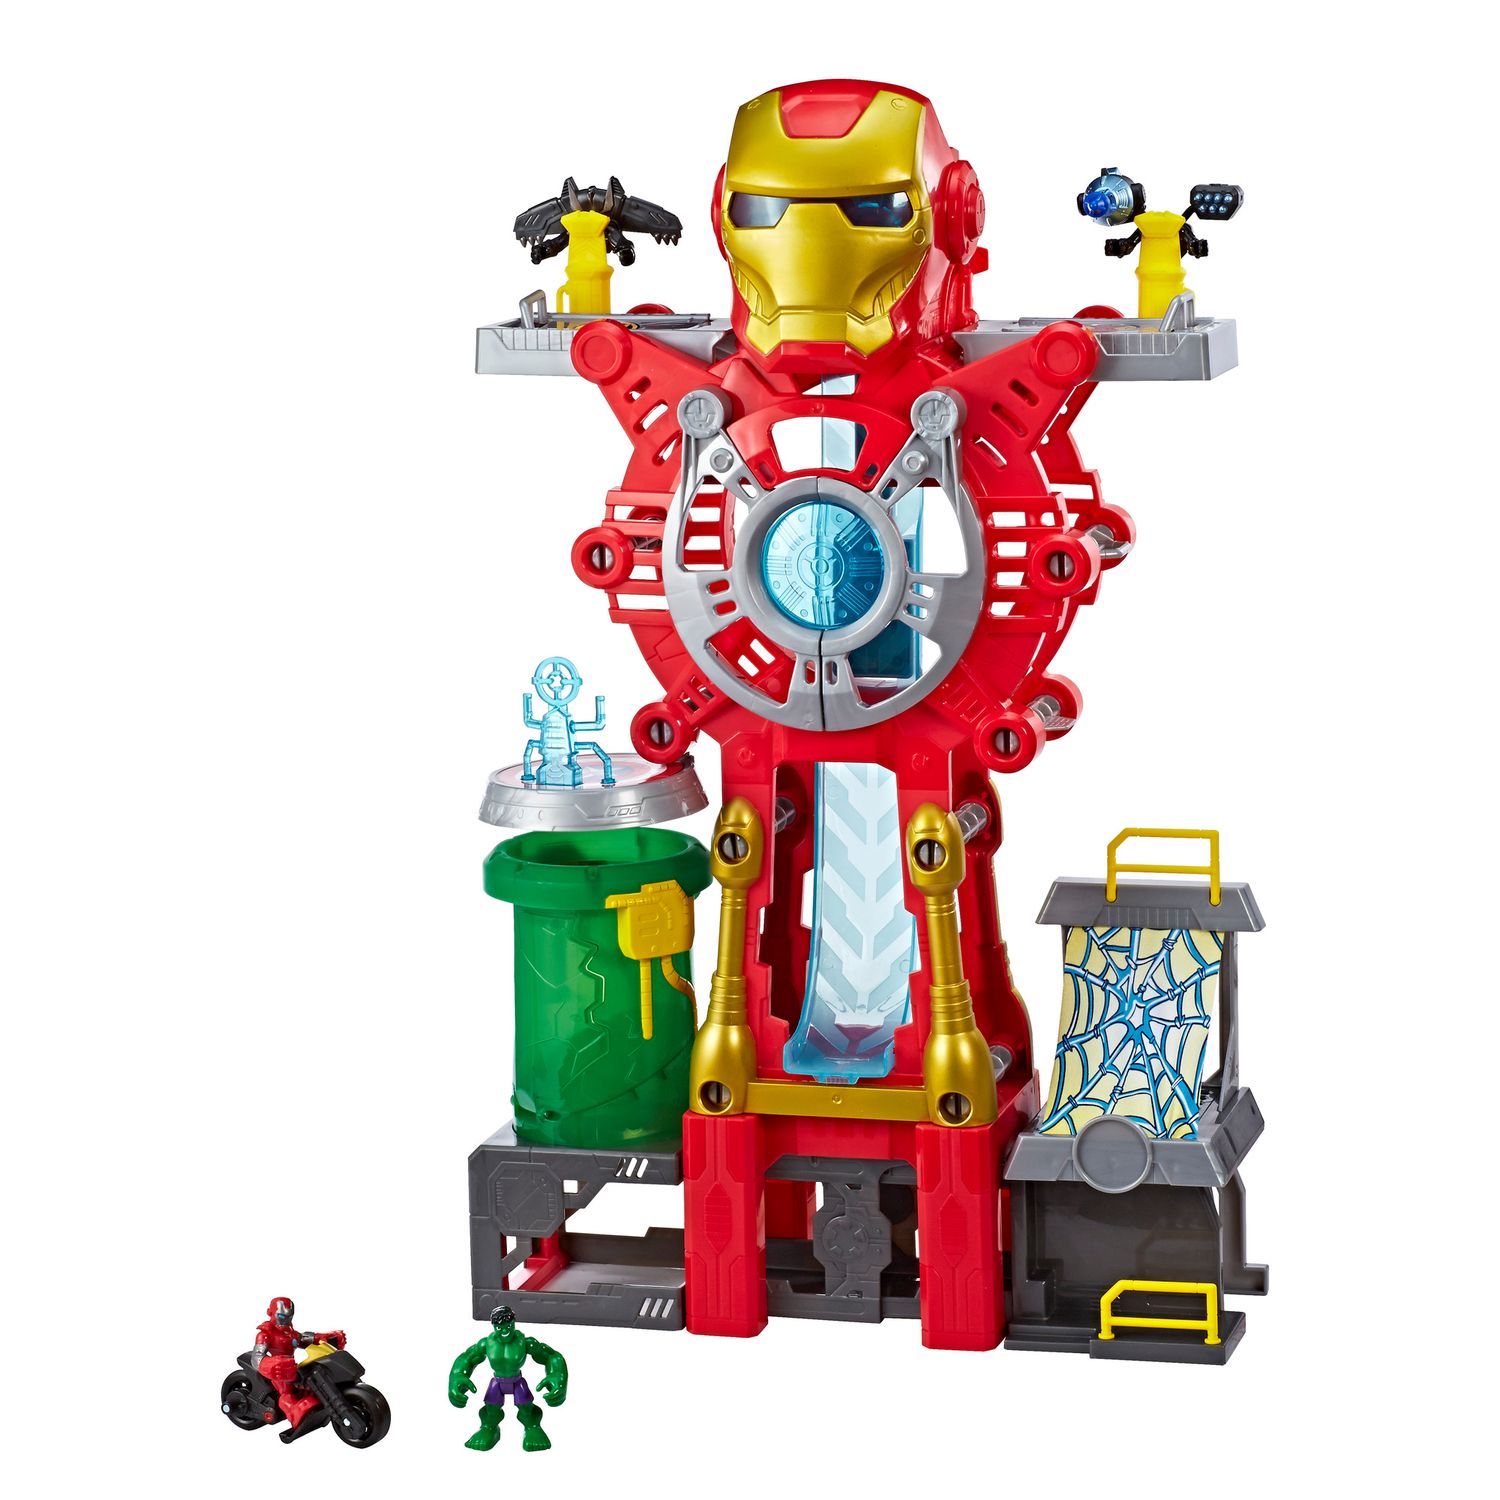 action figure playsets toys